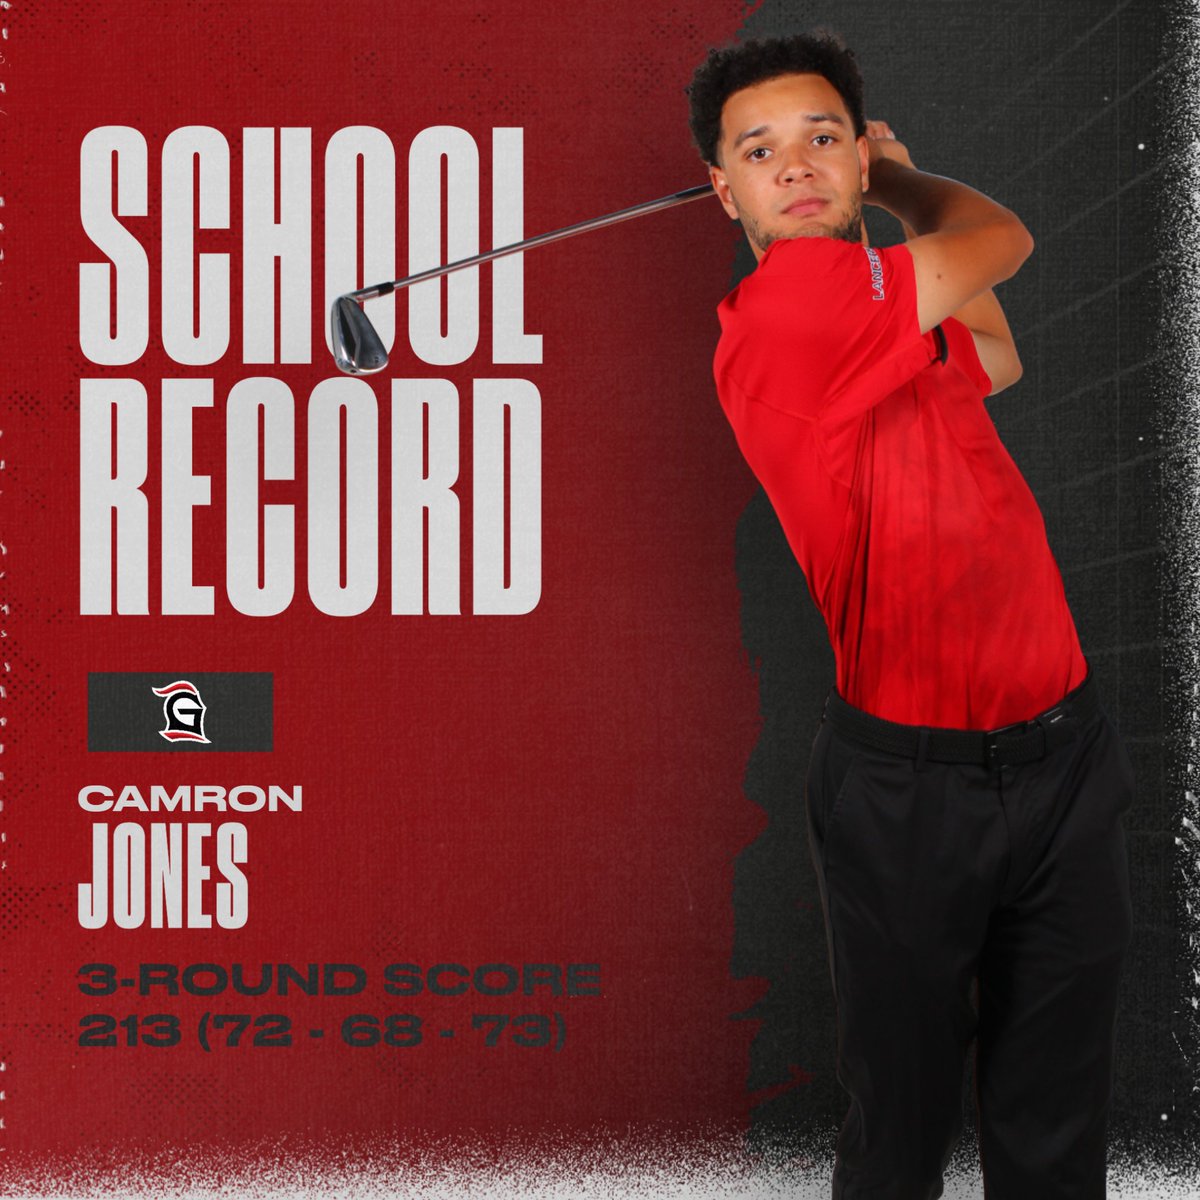 Big-time performance from Camron Jones this week, tying Grace's school record for best 3-round total (213) at the Crossroads League Championships! #LancerUp